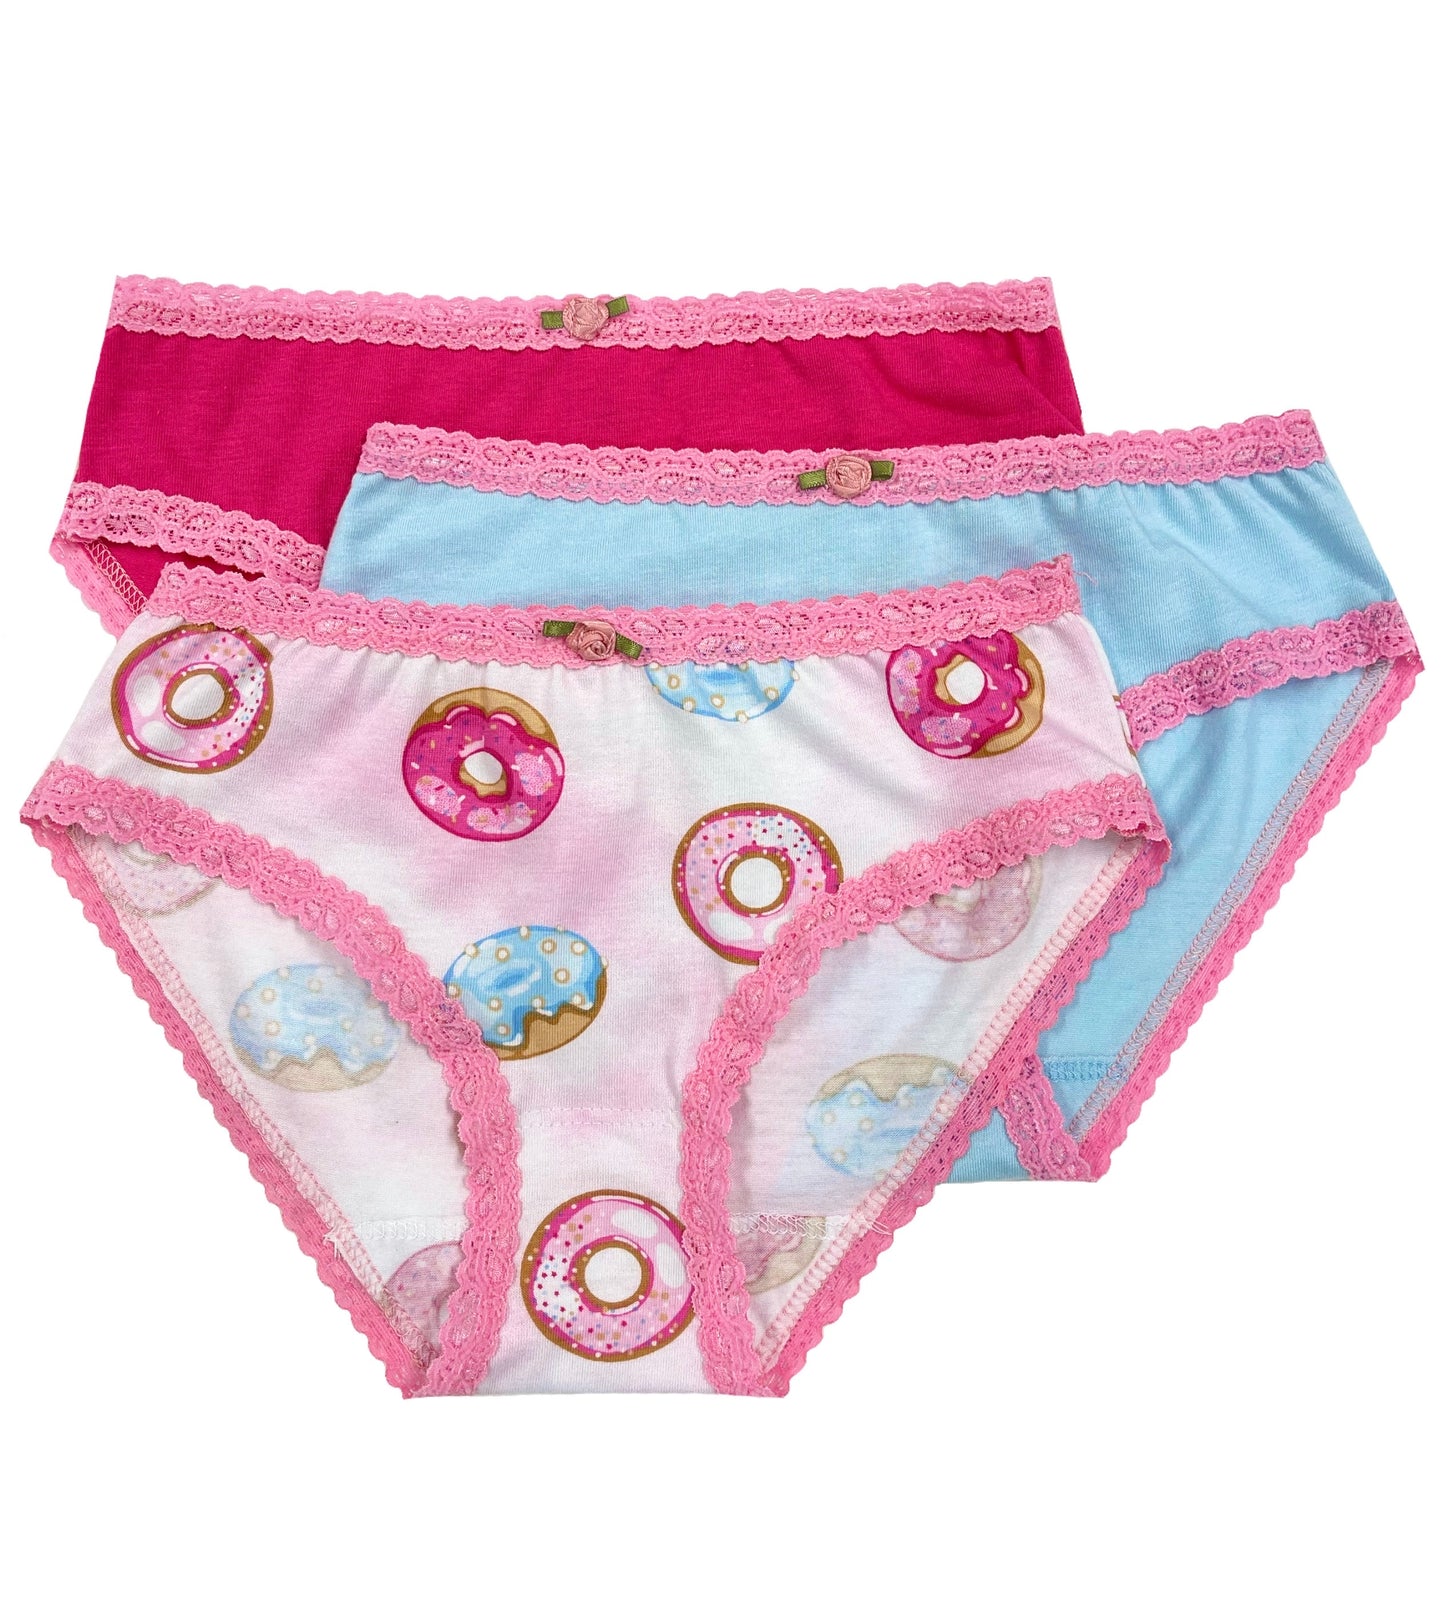  Panties For Women Stylish Panty For Girl Pack Of 3feel